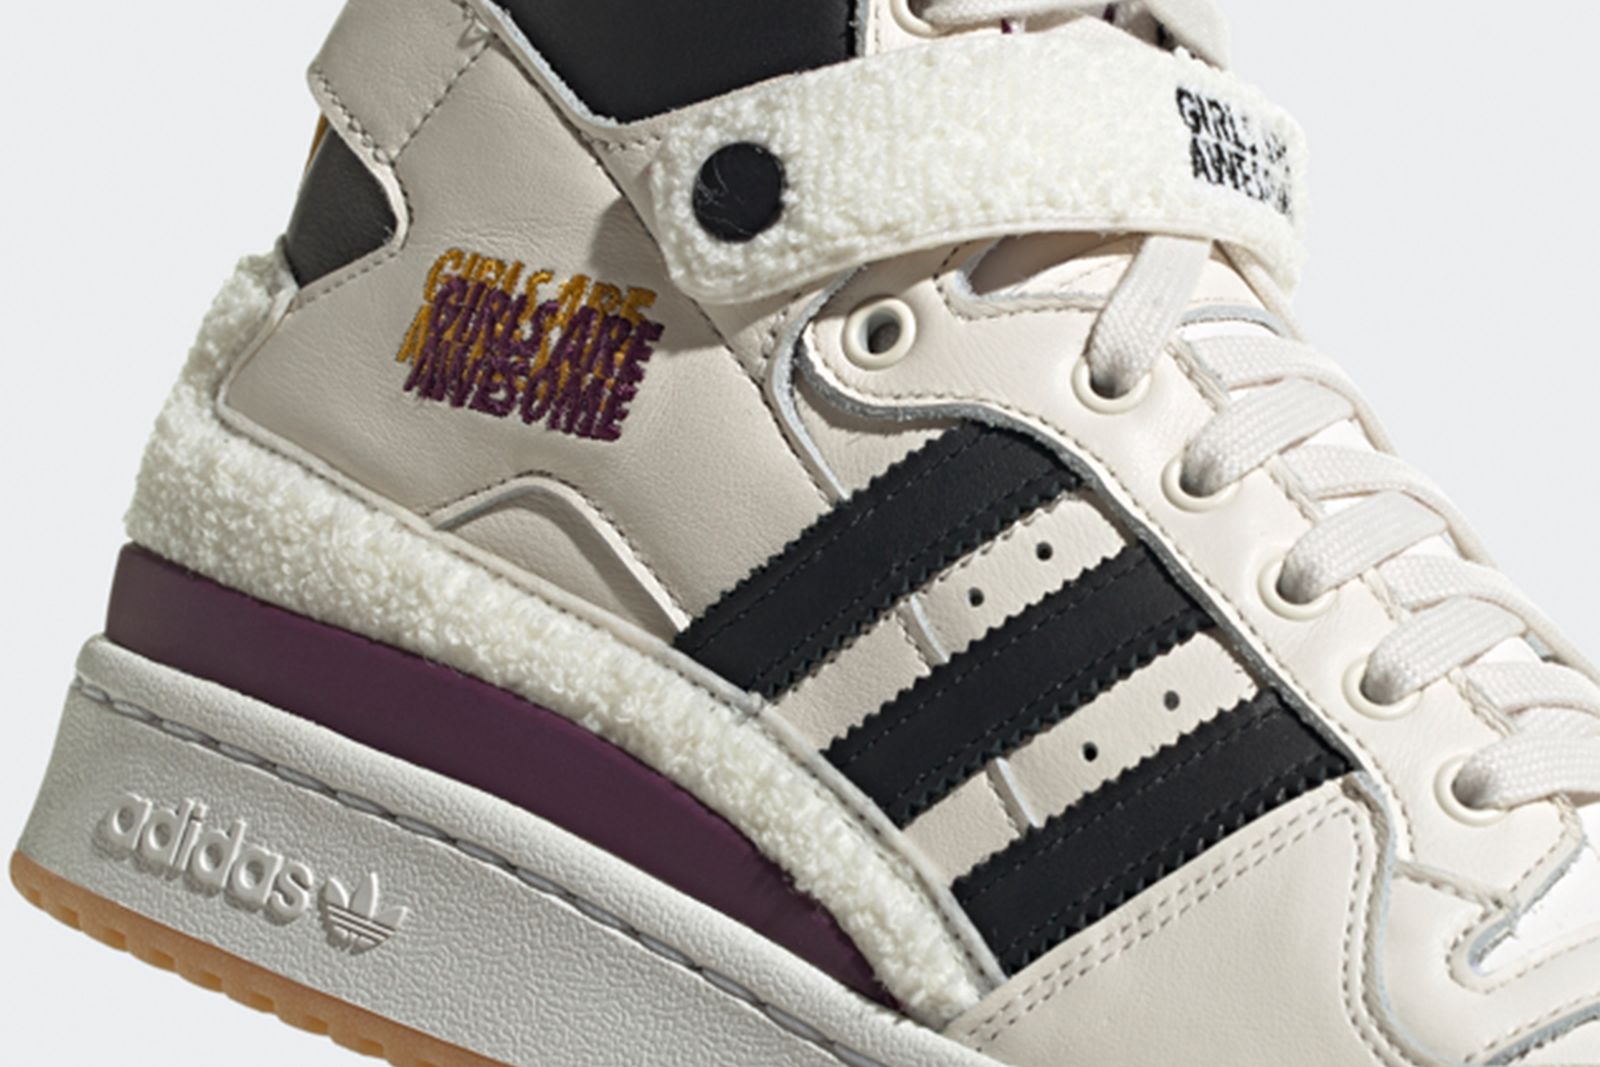 girls-are-awesome-adidas-originals-forum-release-date-price-prdct-03